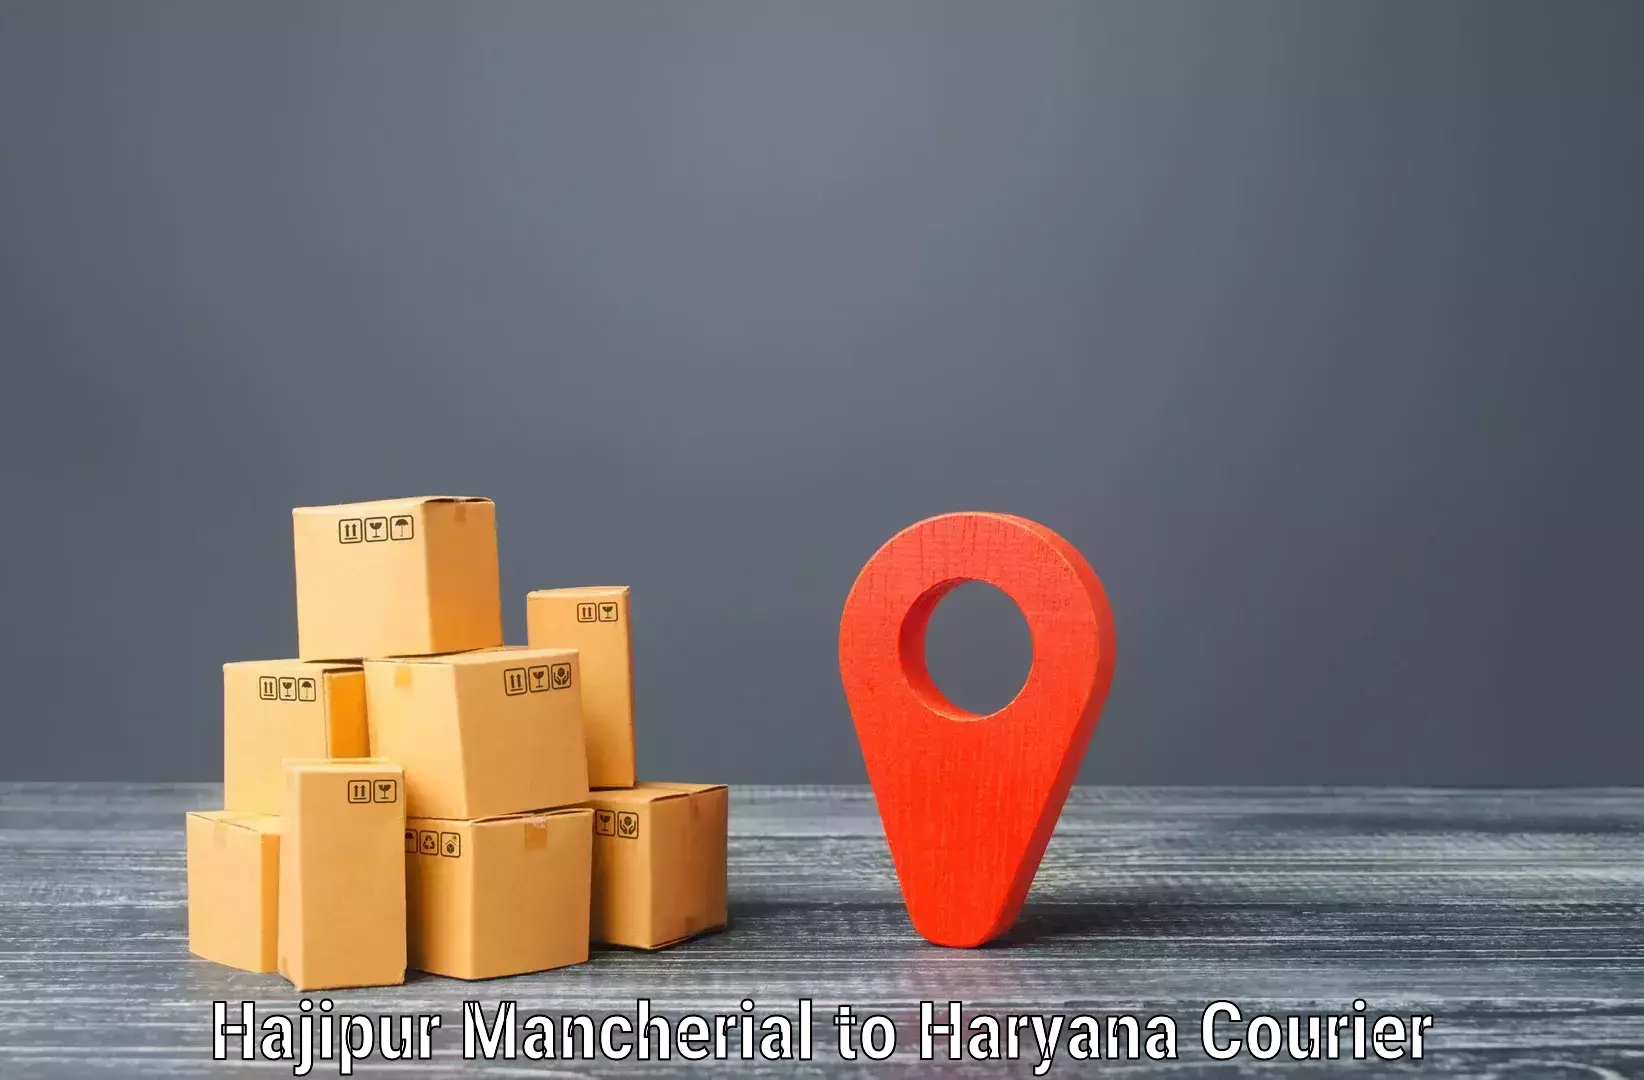 Express package services Hajipur Mancherial to Samalkha